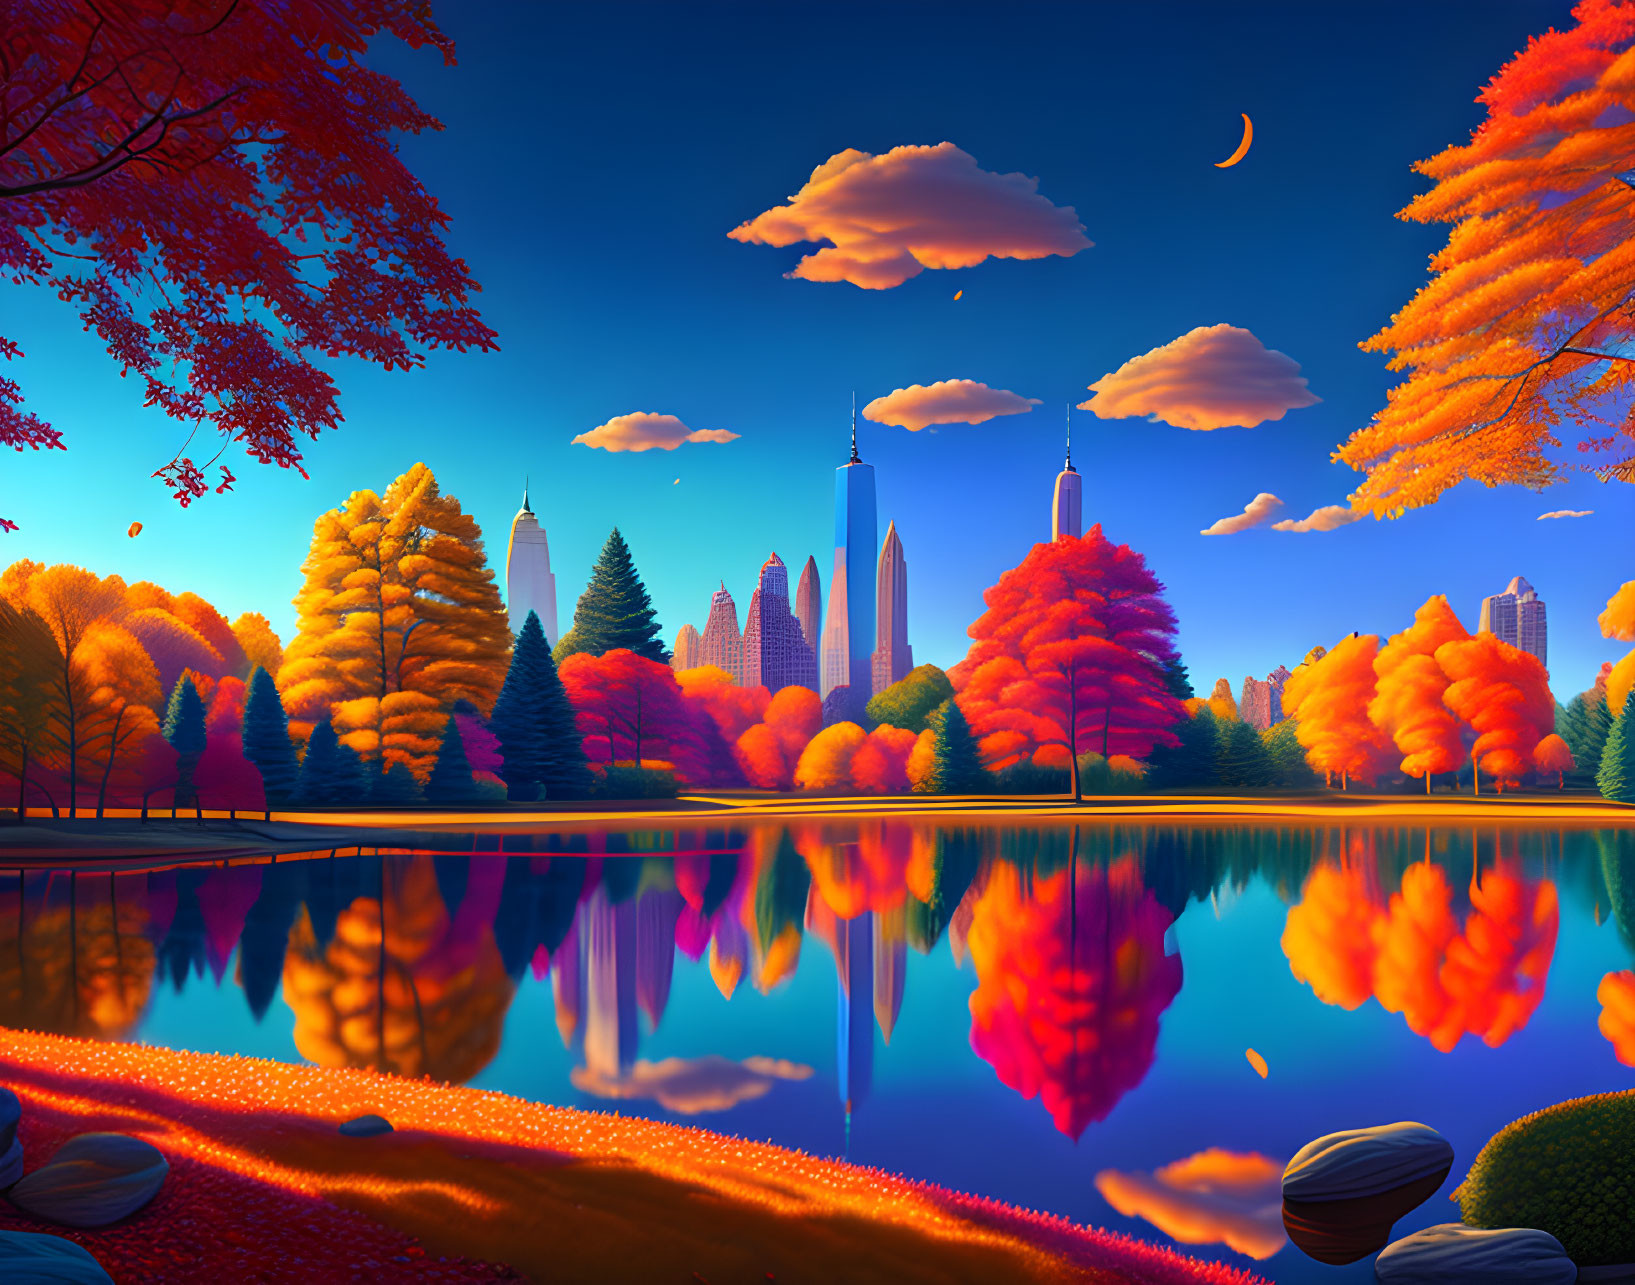 Colorful autumn trees mirrored in lake with city skyline and crescent moon